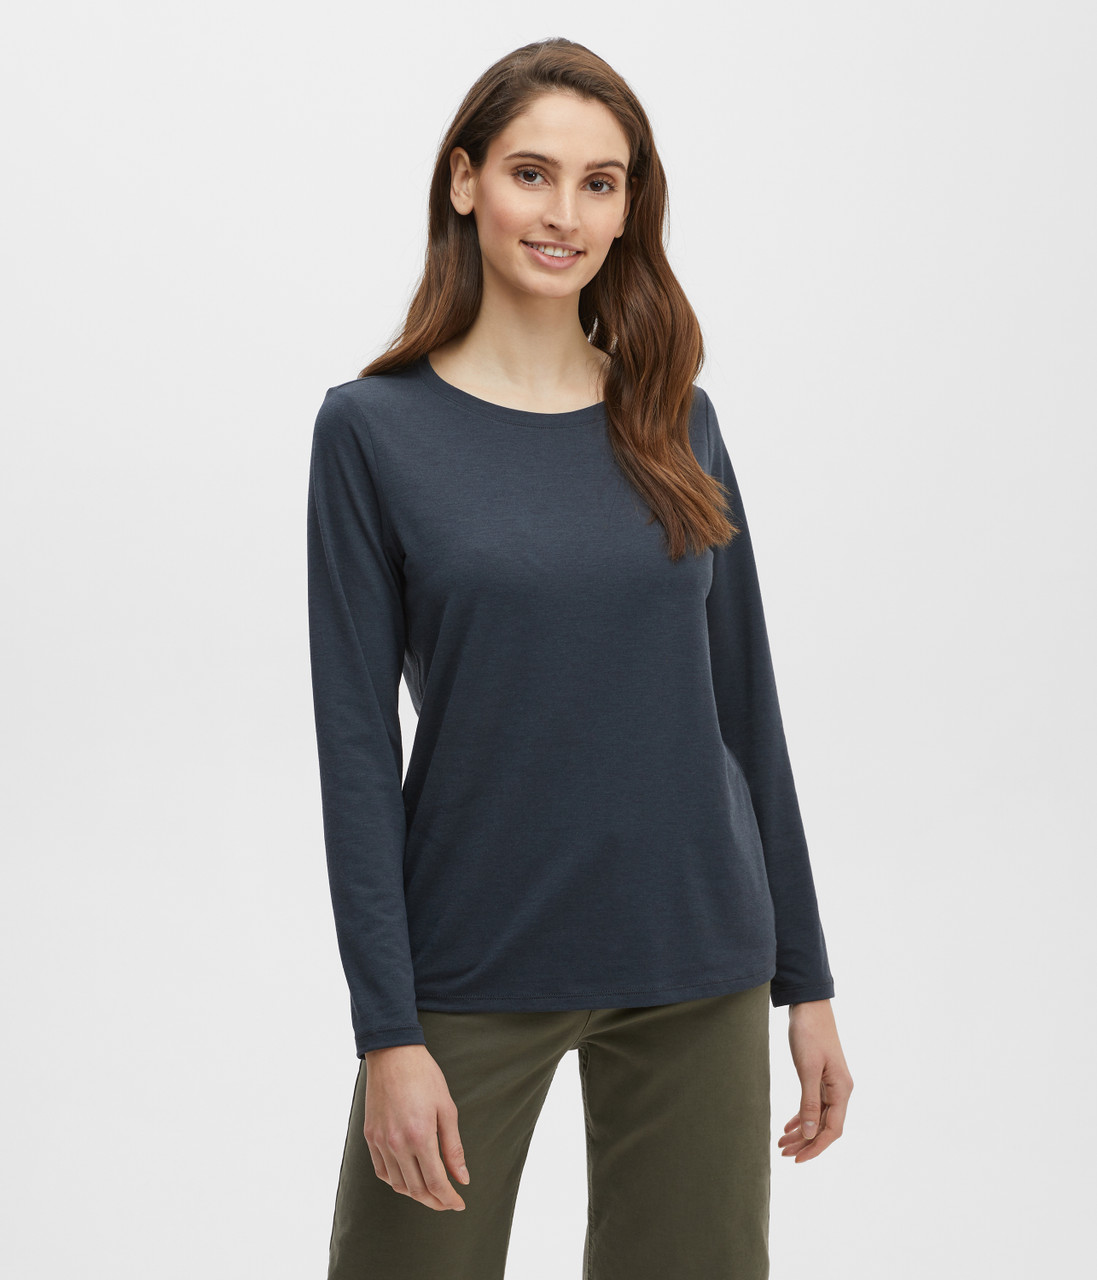 The Essentials Long Sleeve Tee in Palmetto by Over Under Clothing